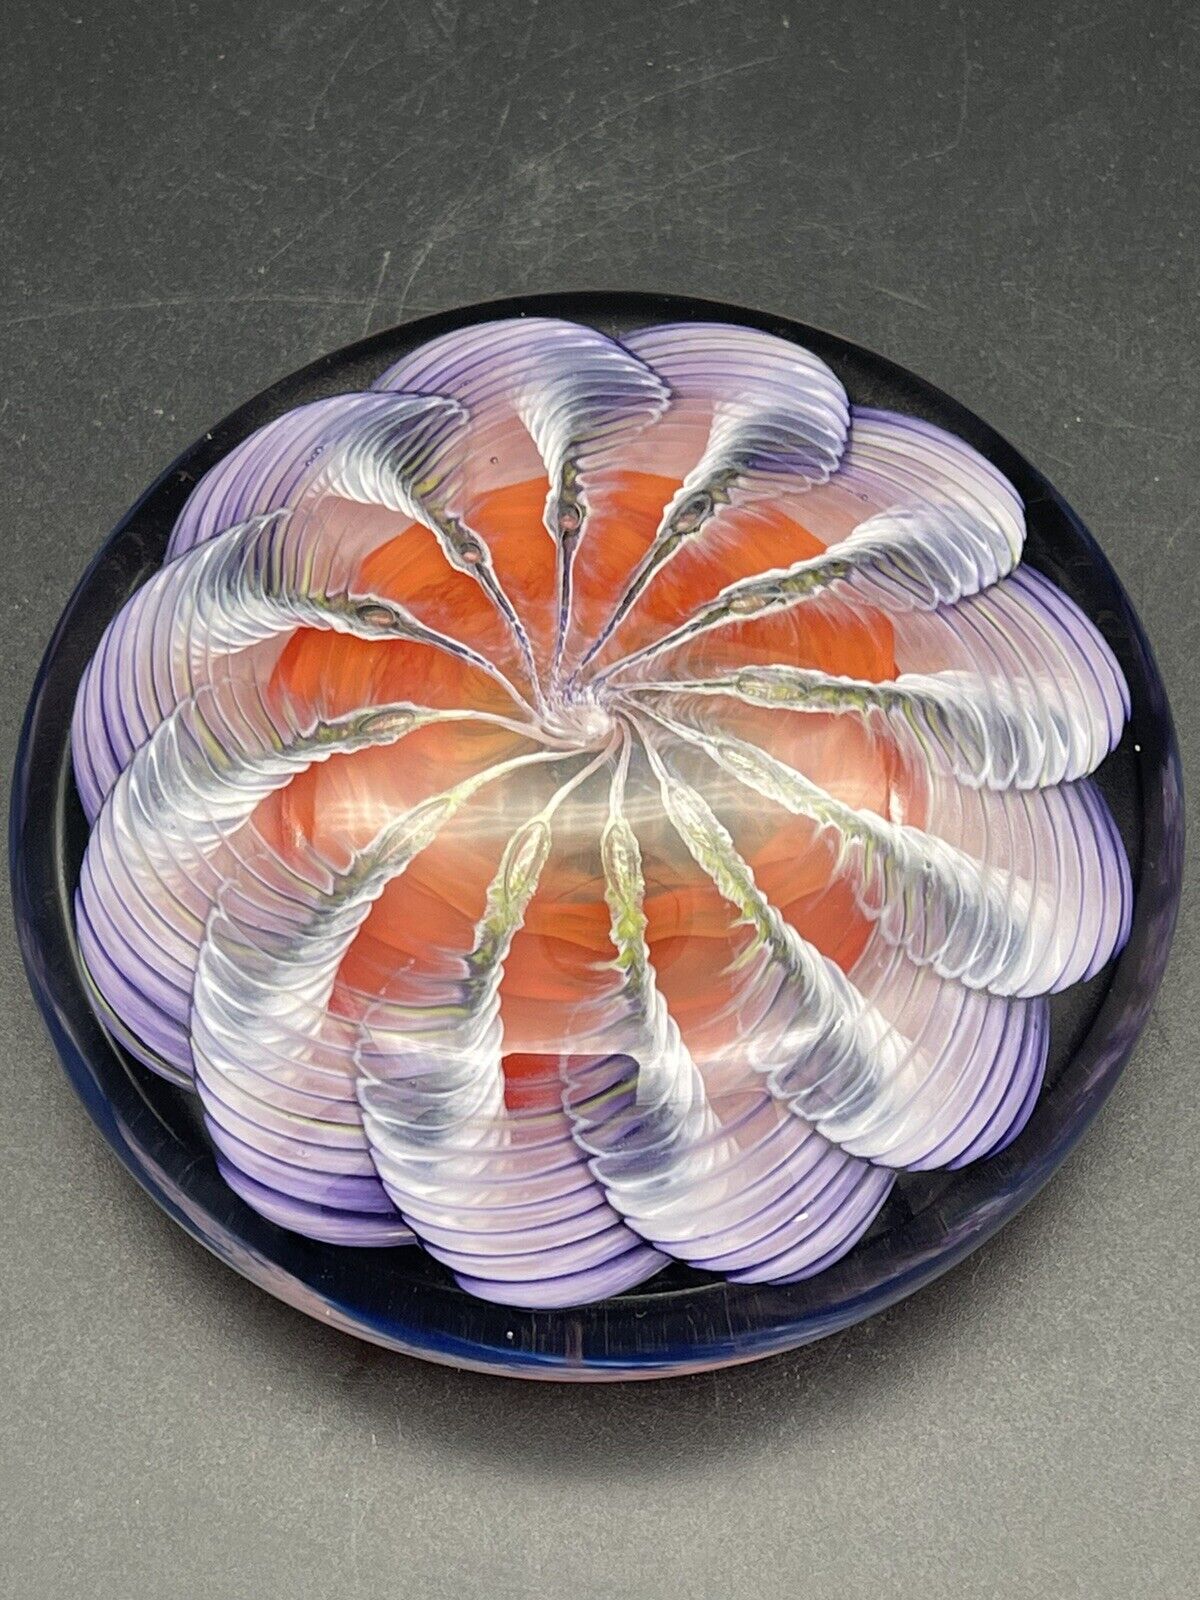 Magnificent 2003 Epiphany Art Glass Paperweight Sea Urchin Jelly Fish Signed